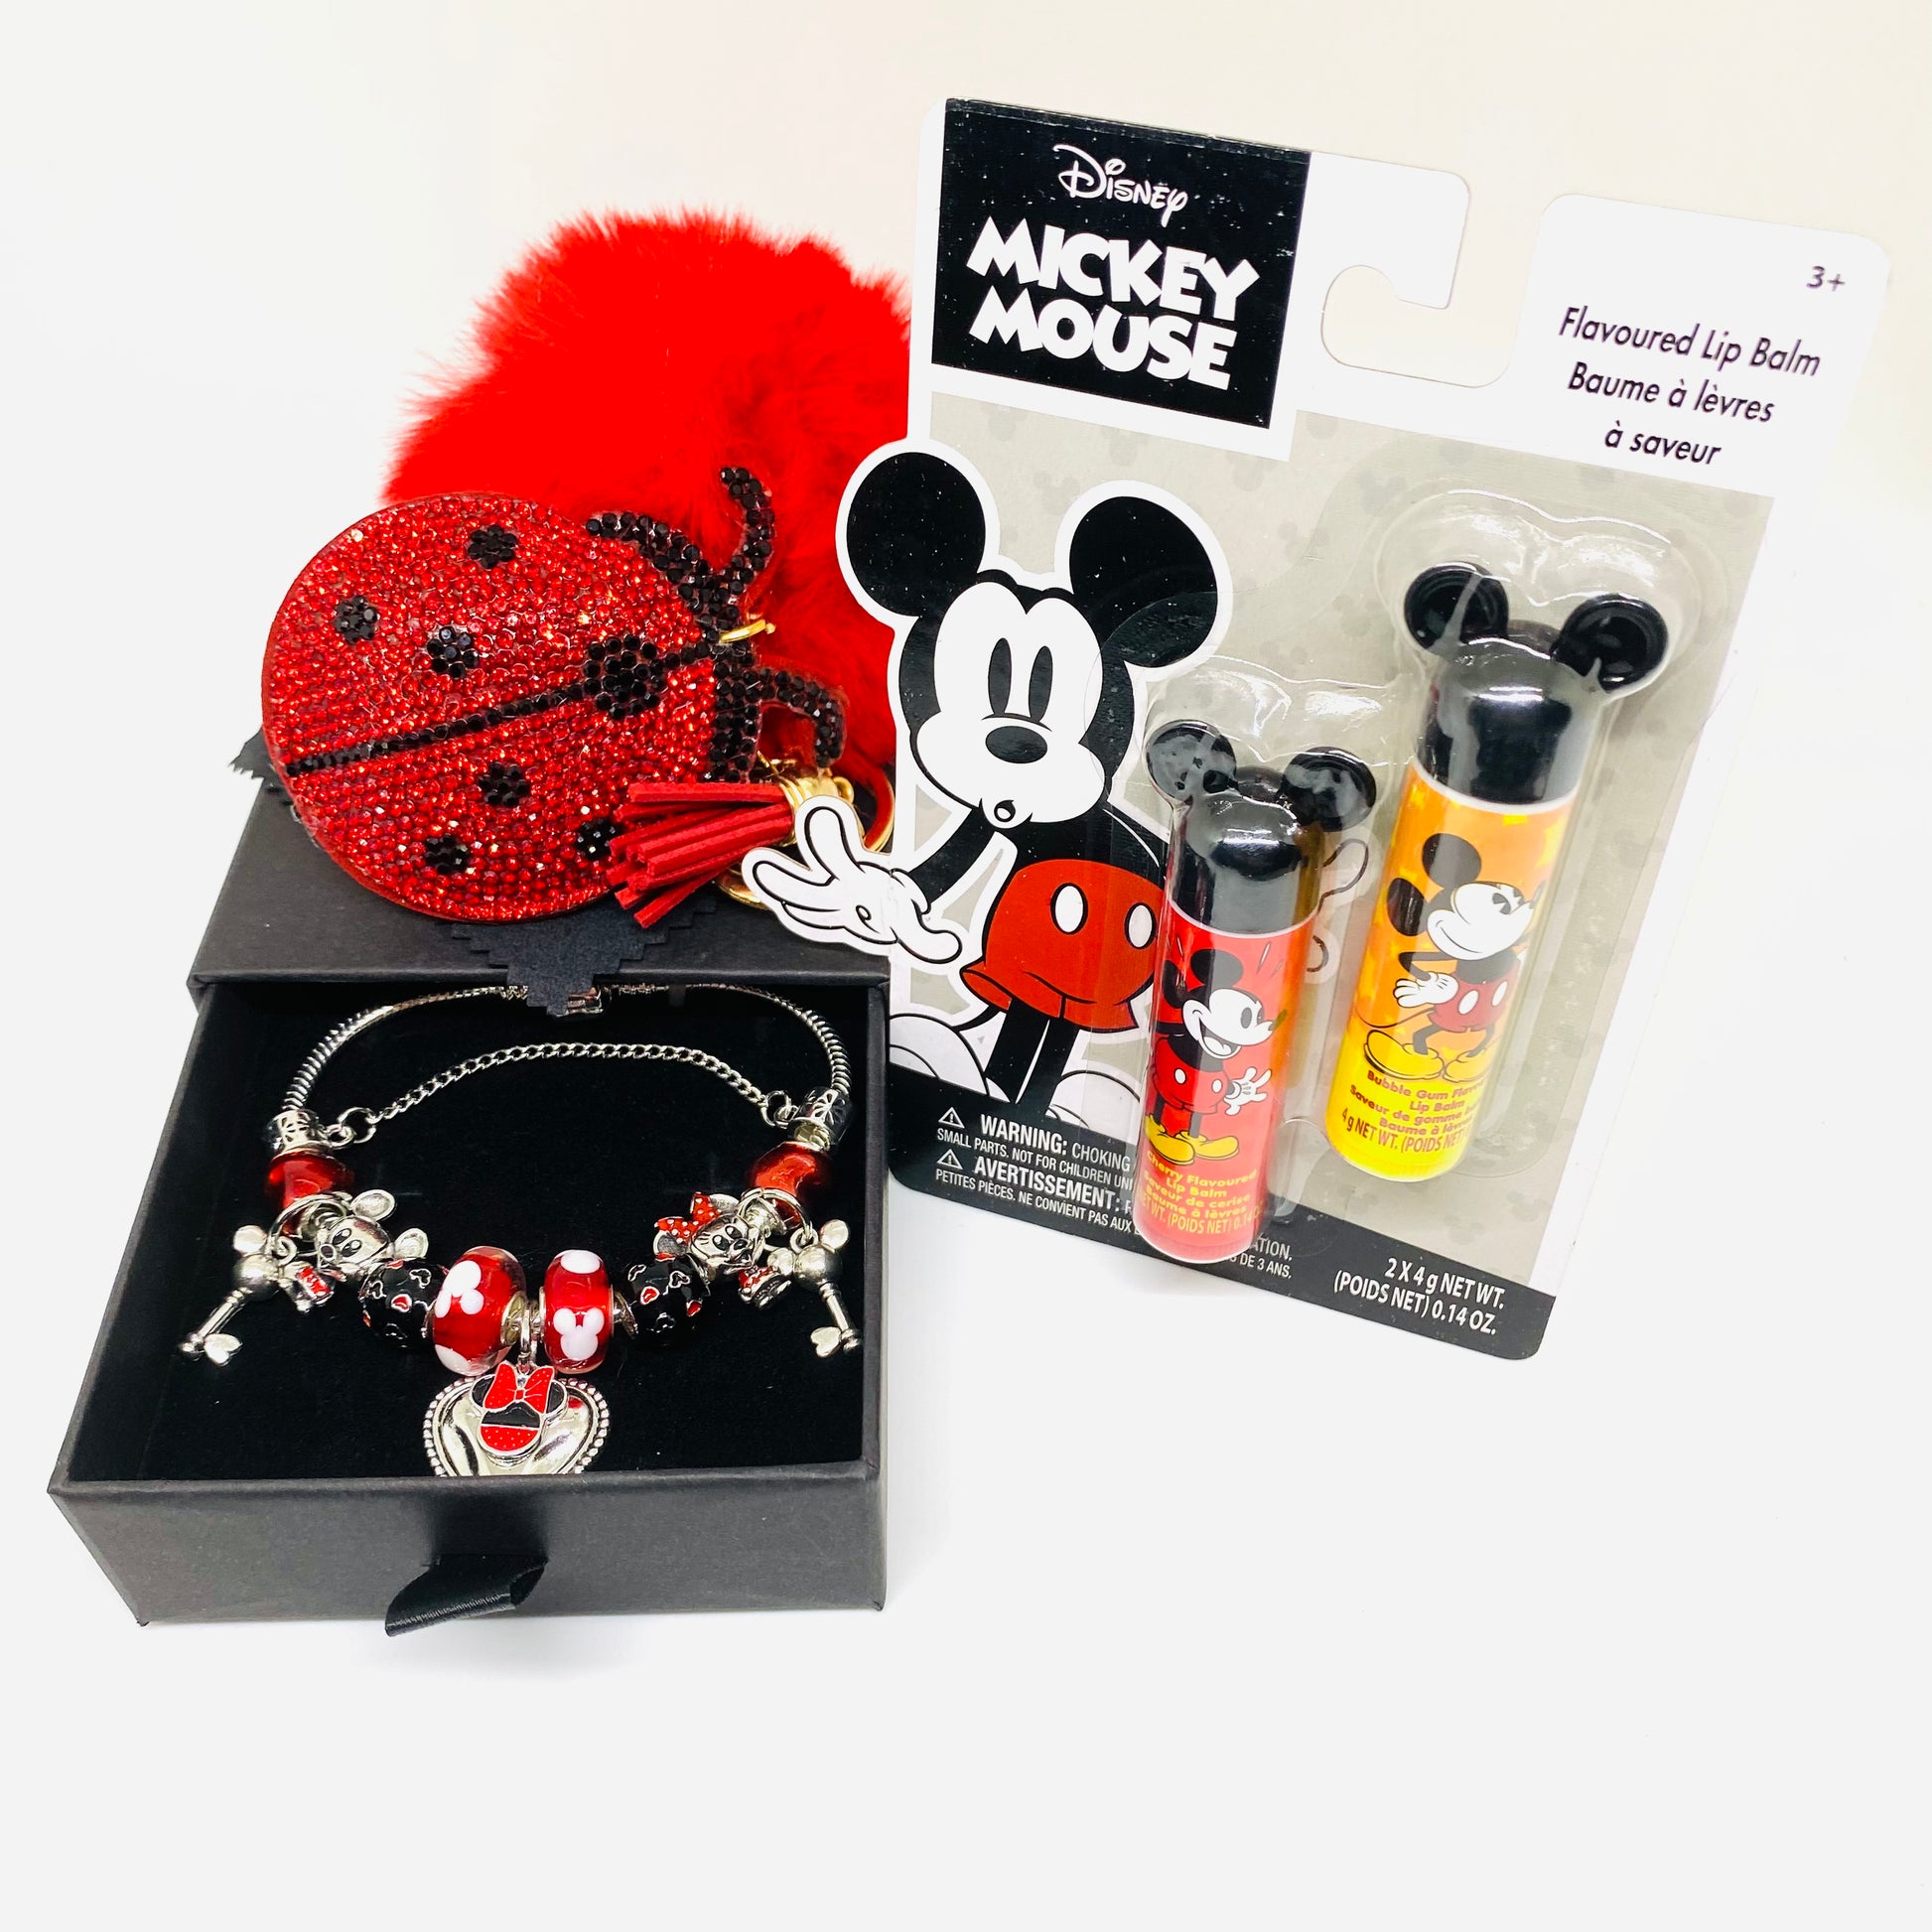 2024 Disney & Friends Vintage Mickey Mouse Silver Charm Bracelet Bundle Includes a matching Duo Disney Chapstick Bundle In The Flavor Bubble Gum & Cherry & One Red and Black sequence Lady Bug Sparkly Gold Keychain With fur Ball Attachment.